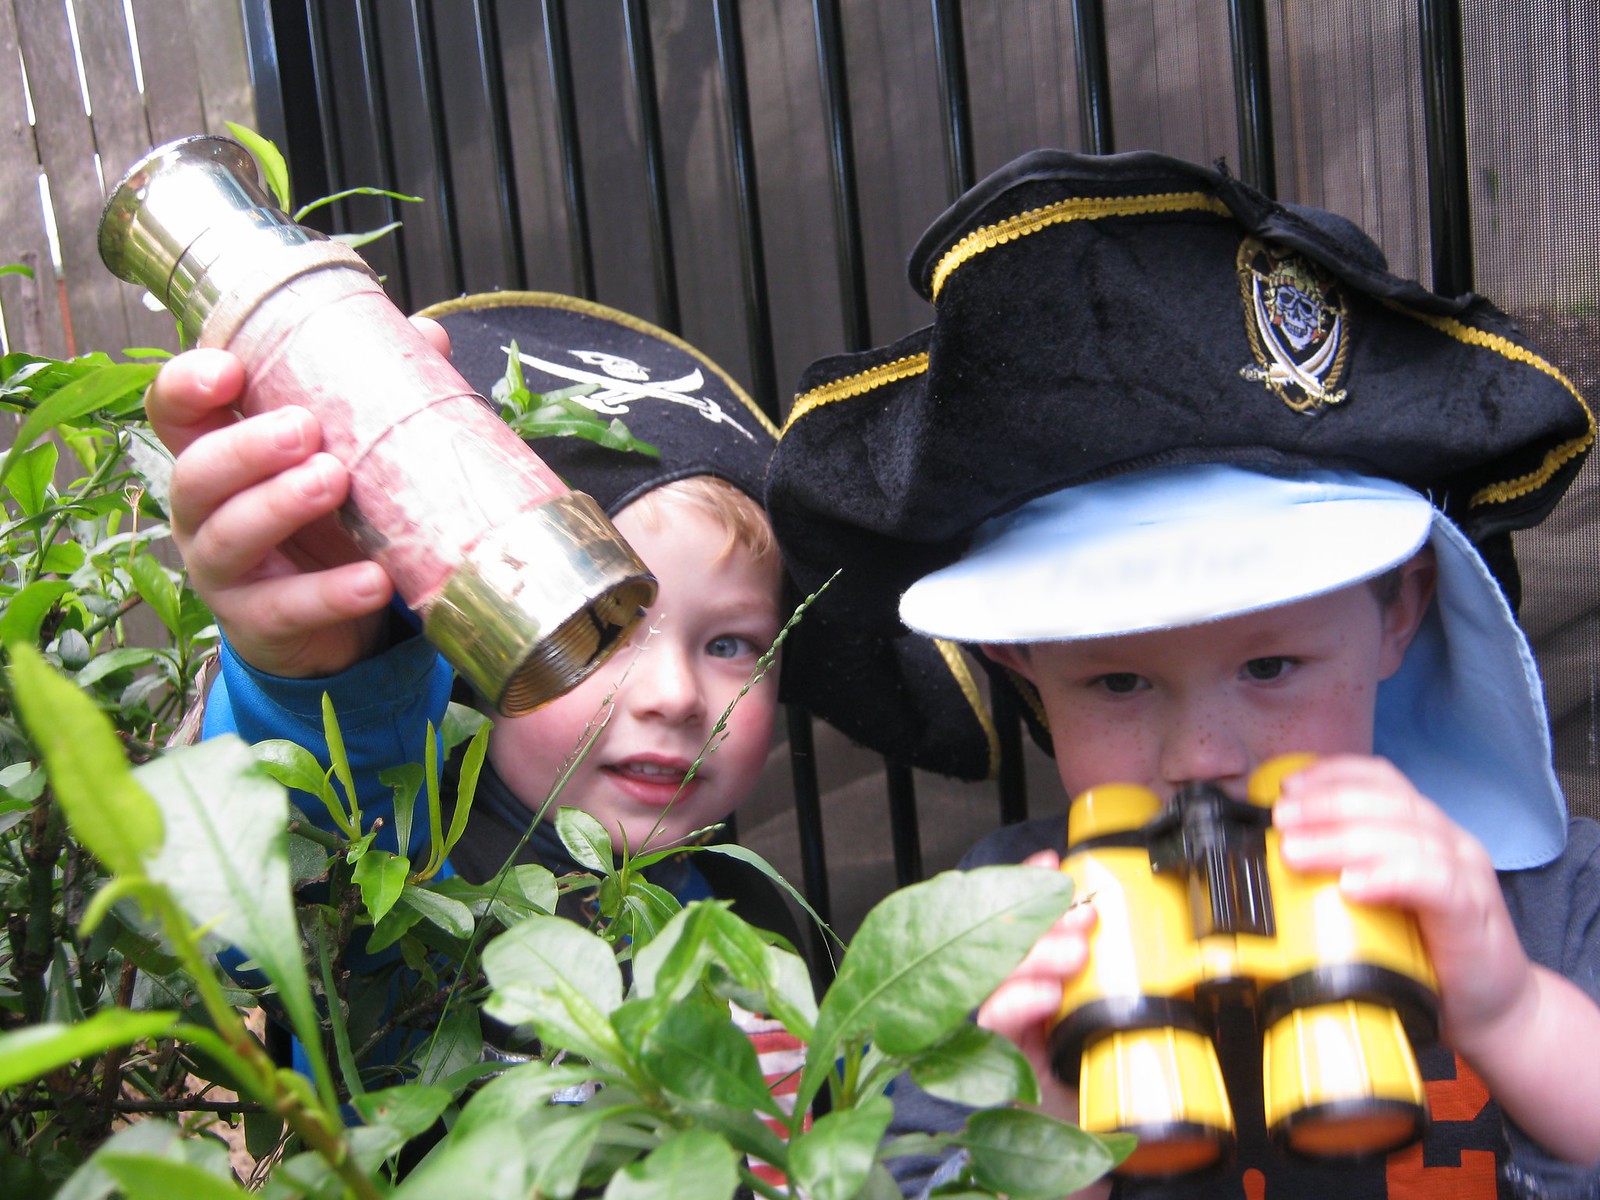 Aaaarghh- we are pirates looking for treasure